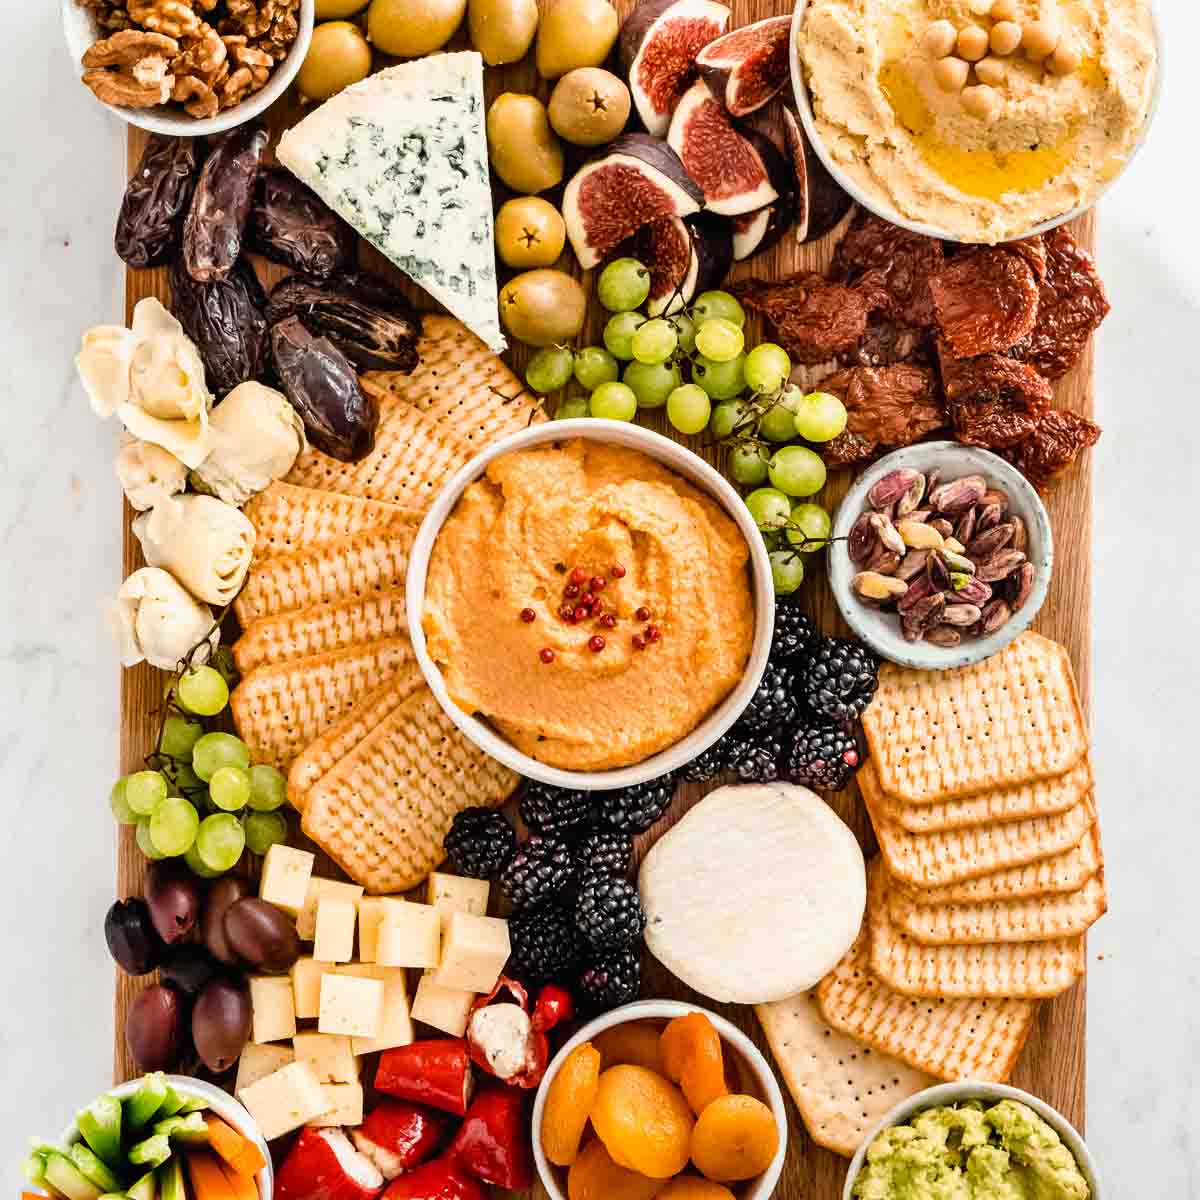 An overhead view of the vegetarian charcuterie board.